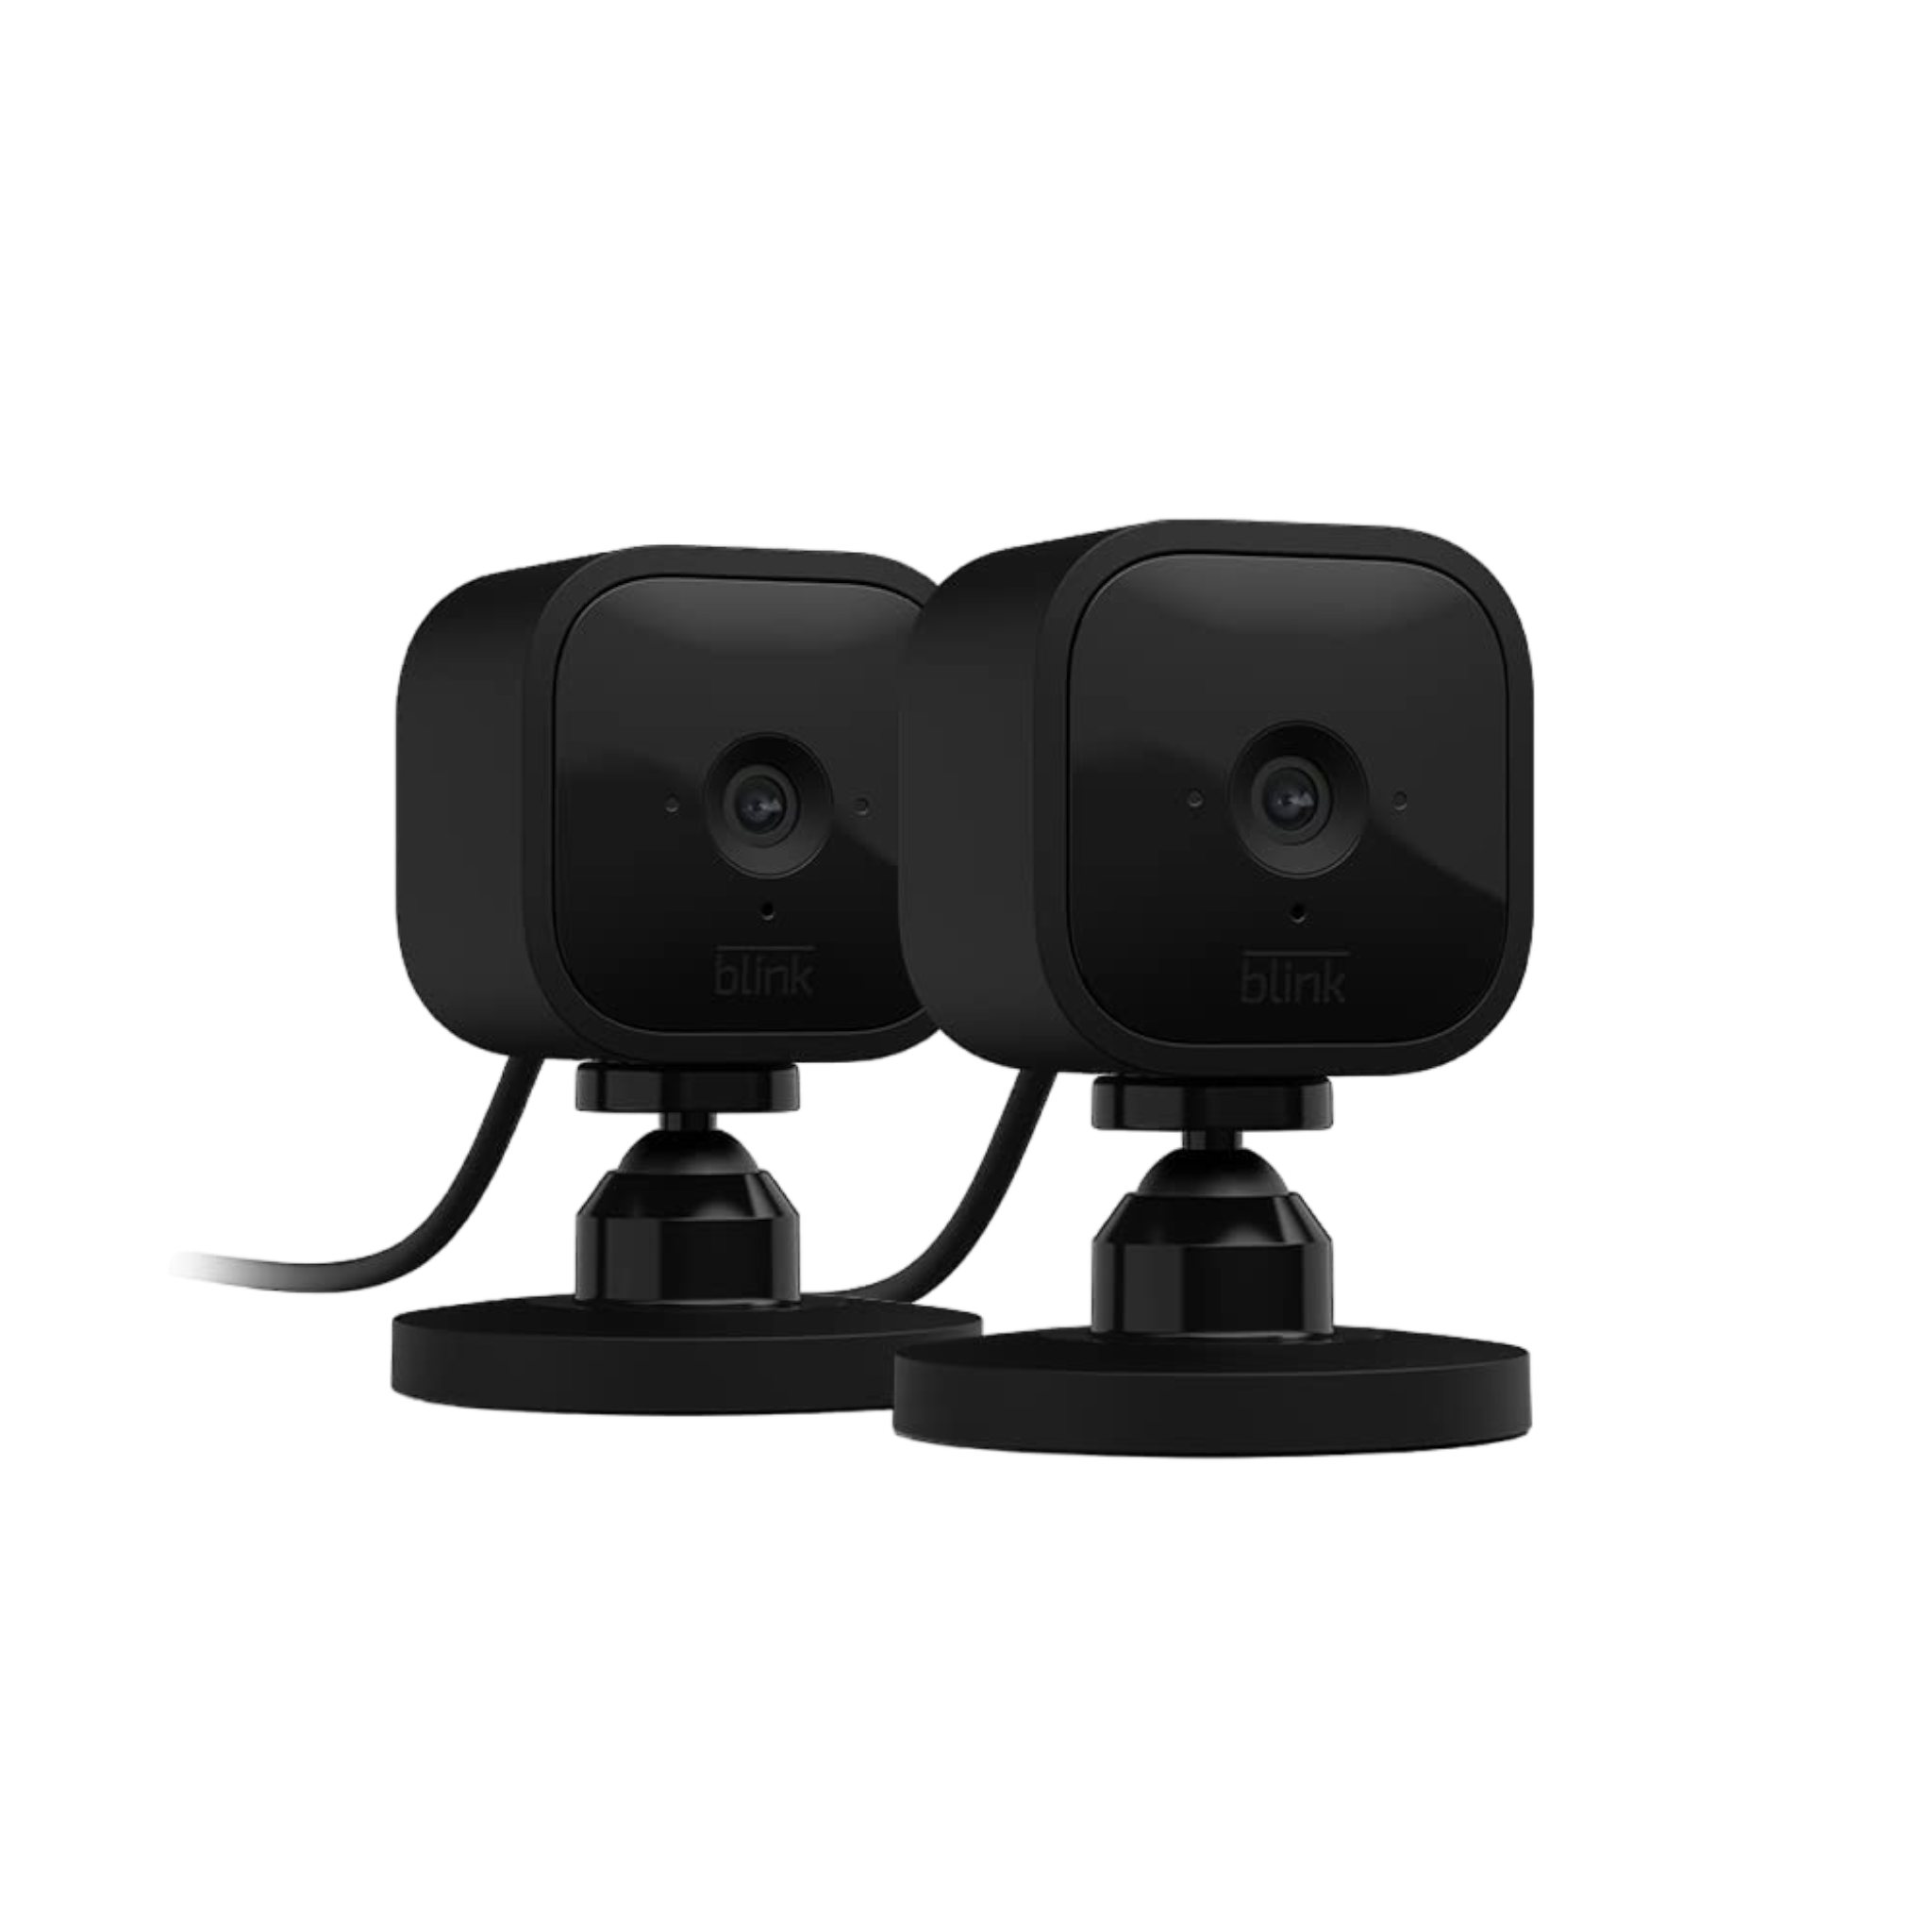 2 Pack Blink Mini Indoor 1080p Wi-Fi Security Camera with Motion Detec